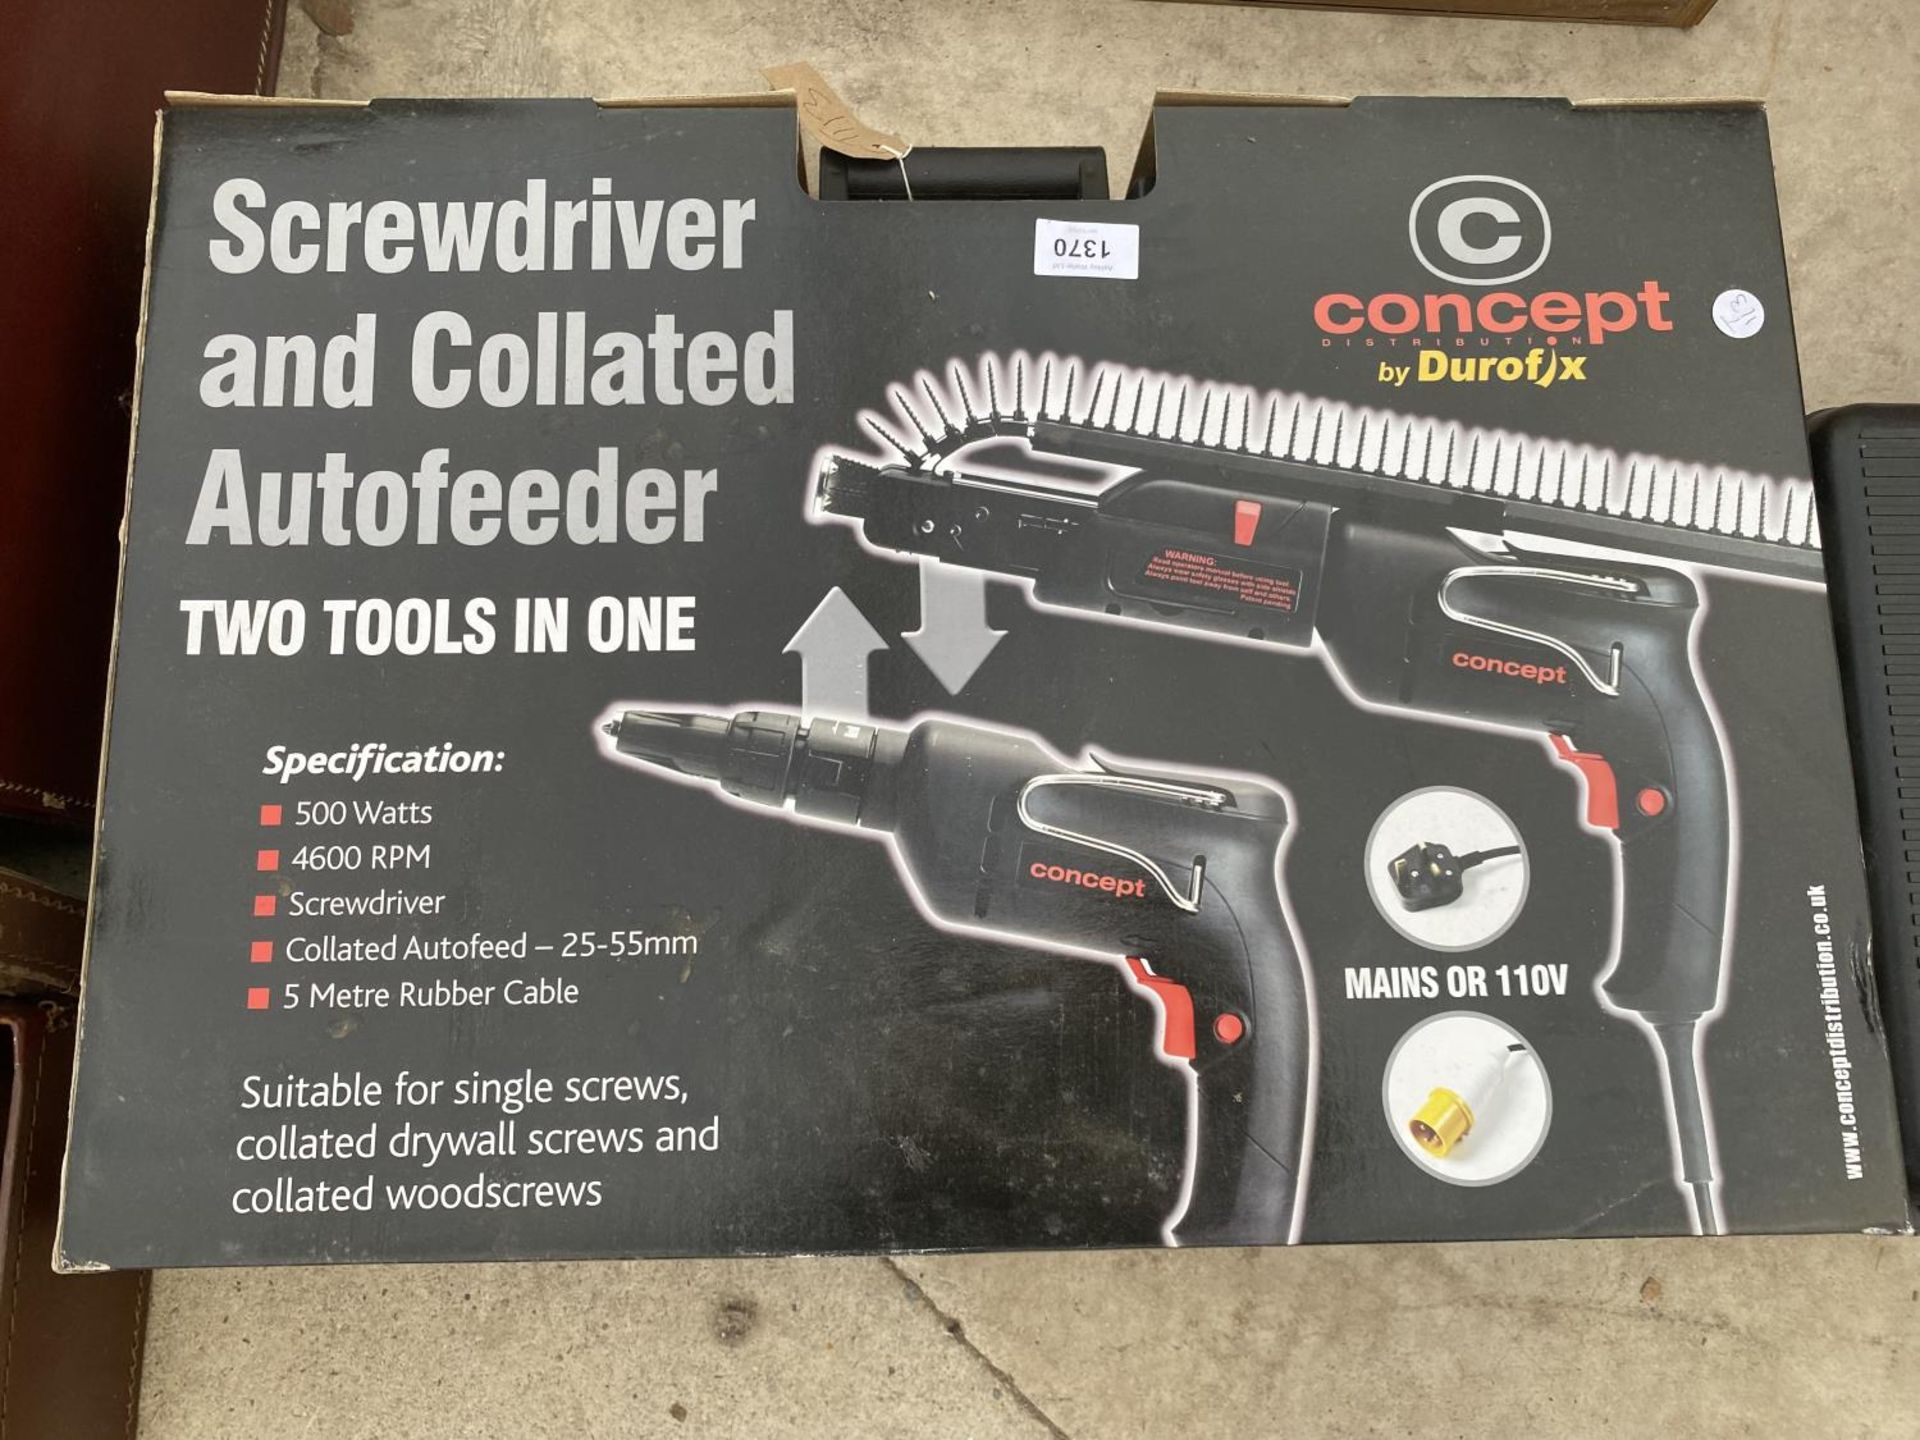 A CONCEPT BY DUROFIX SCREWDRIVER AND COLLATED AUTOFEEDER